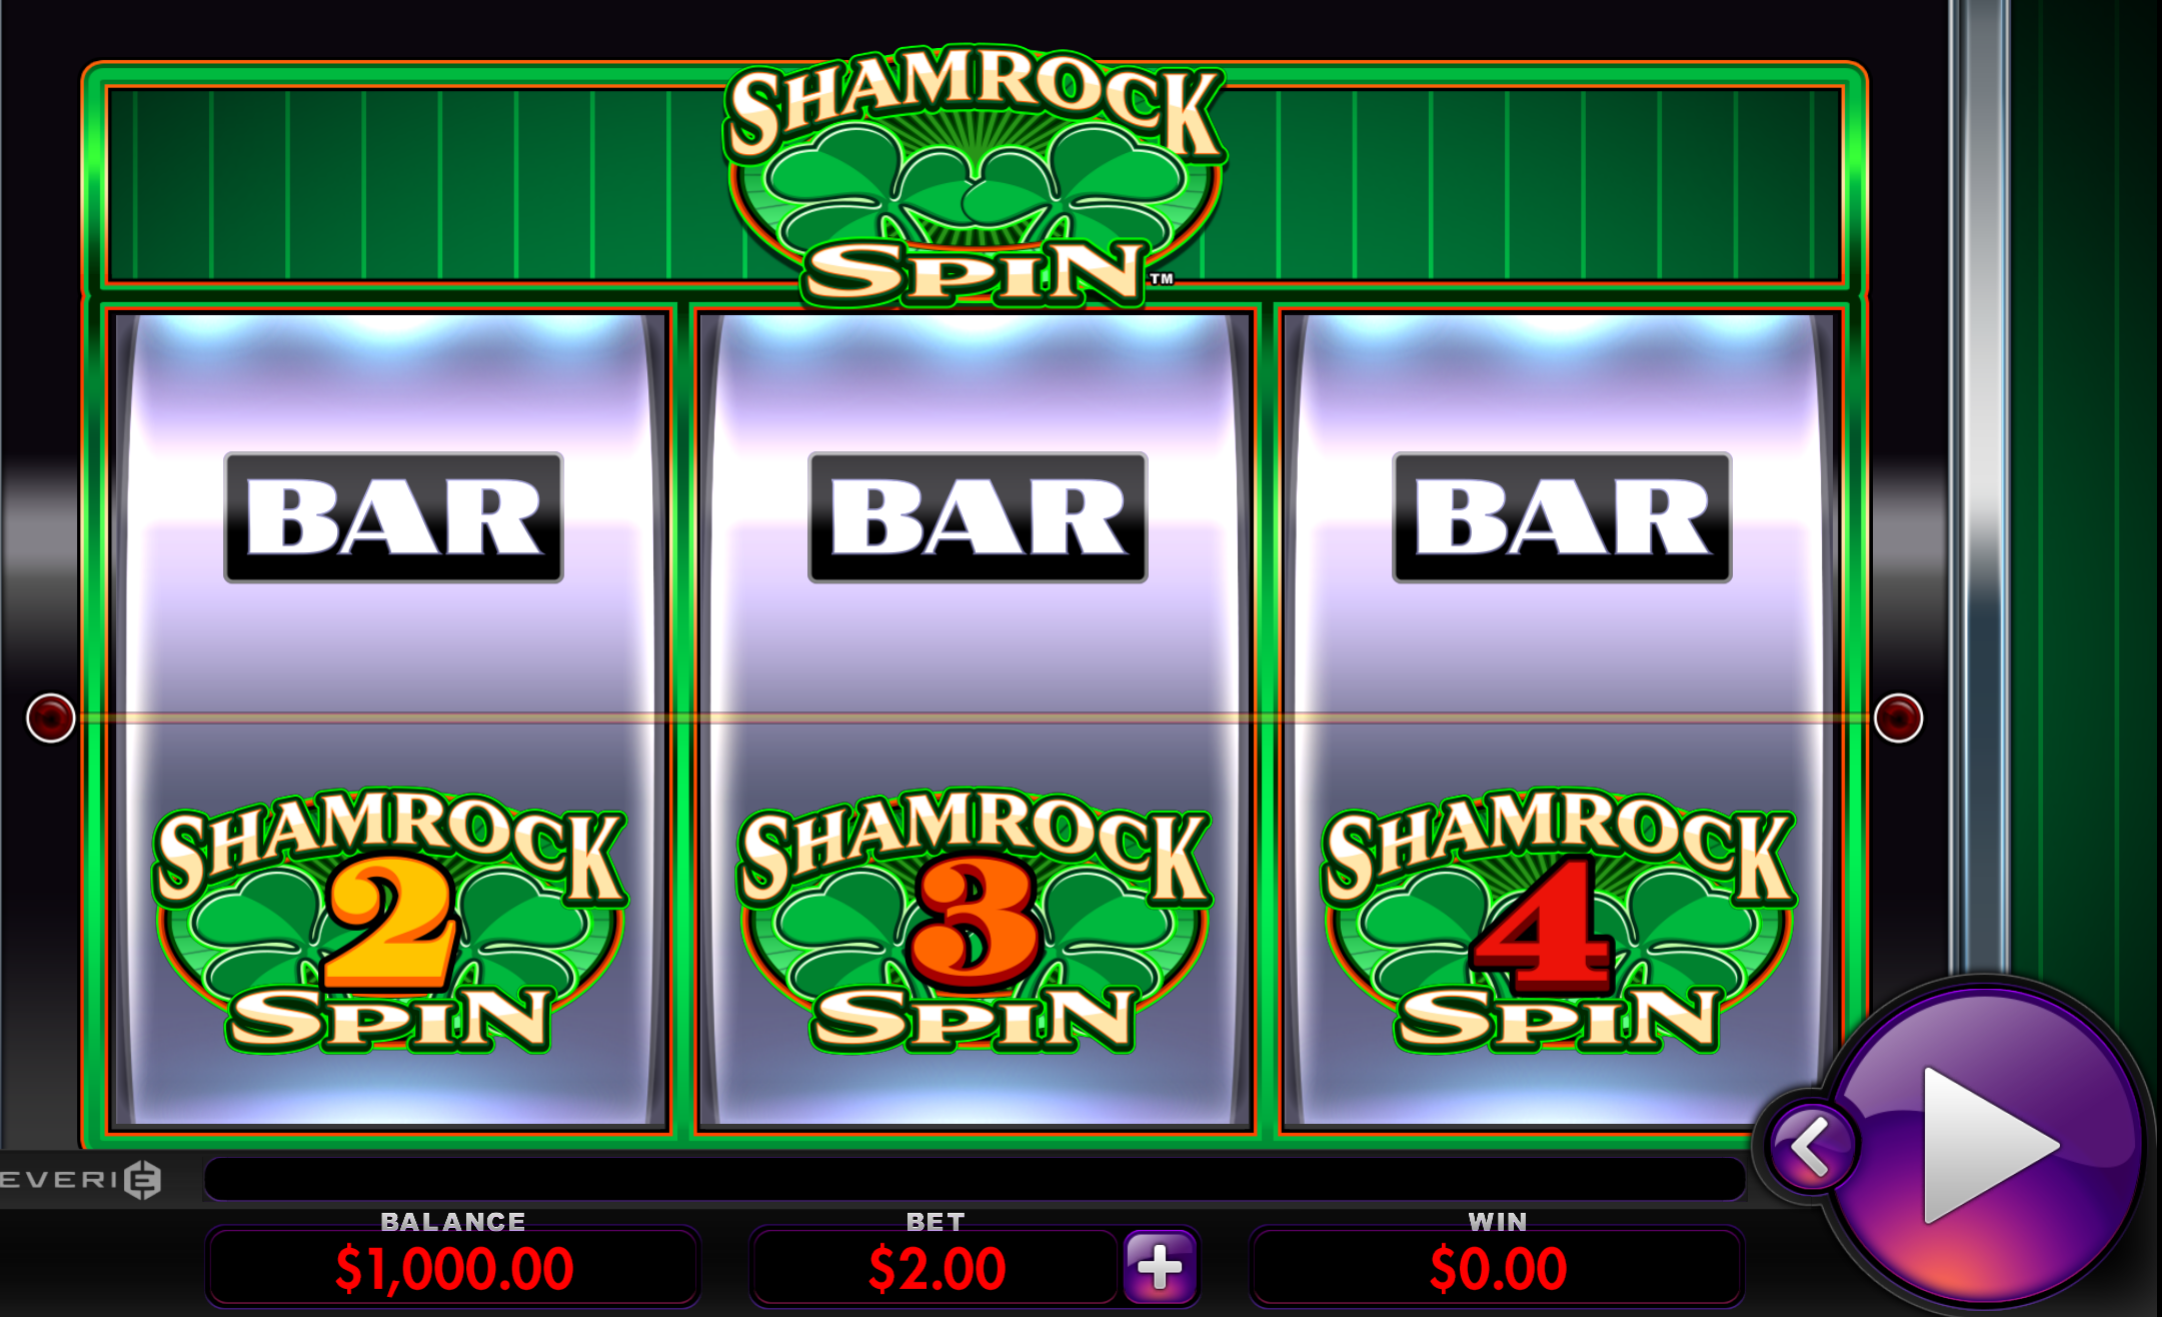 The slot features three reels with a chrome finish reminiscent of classic Vegas games